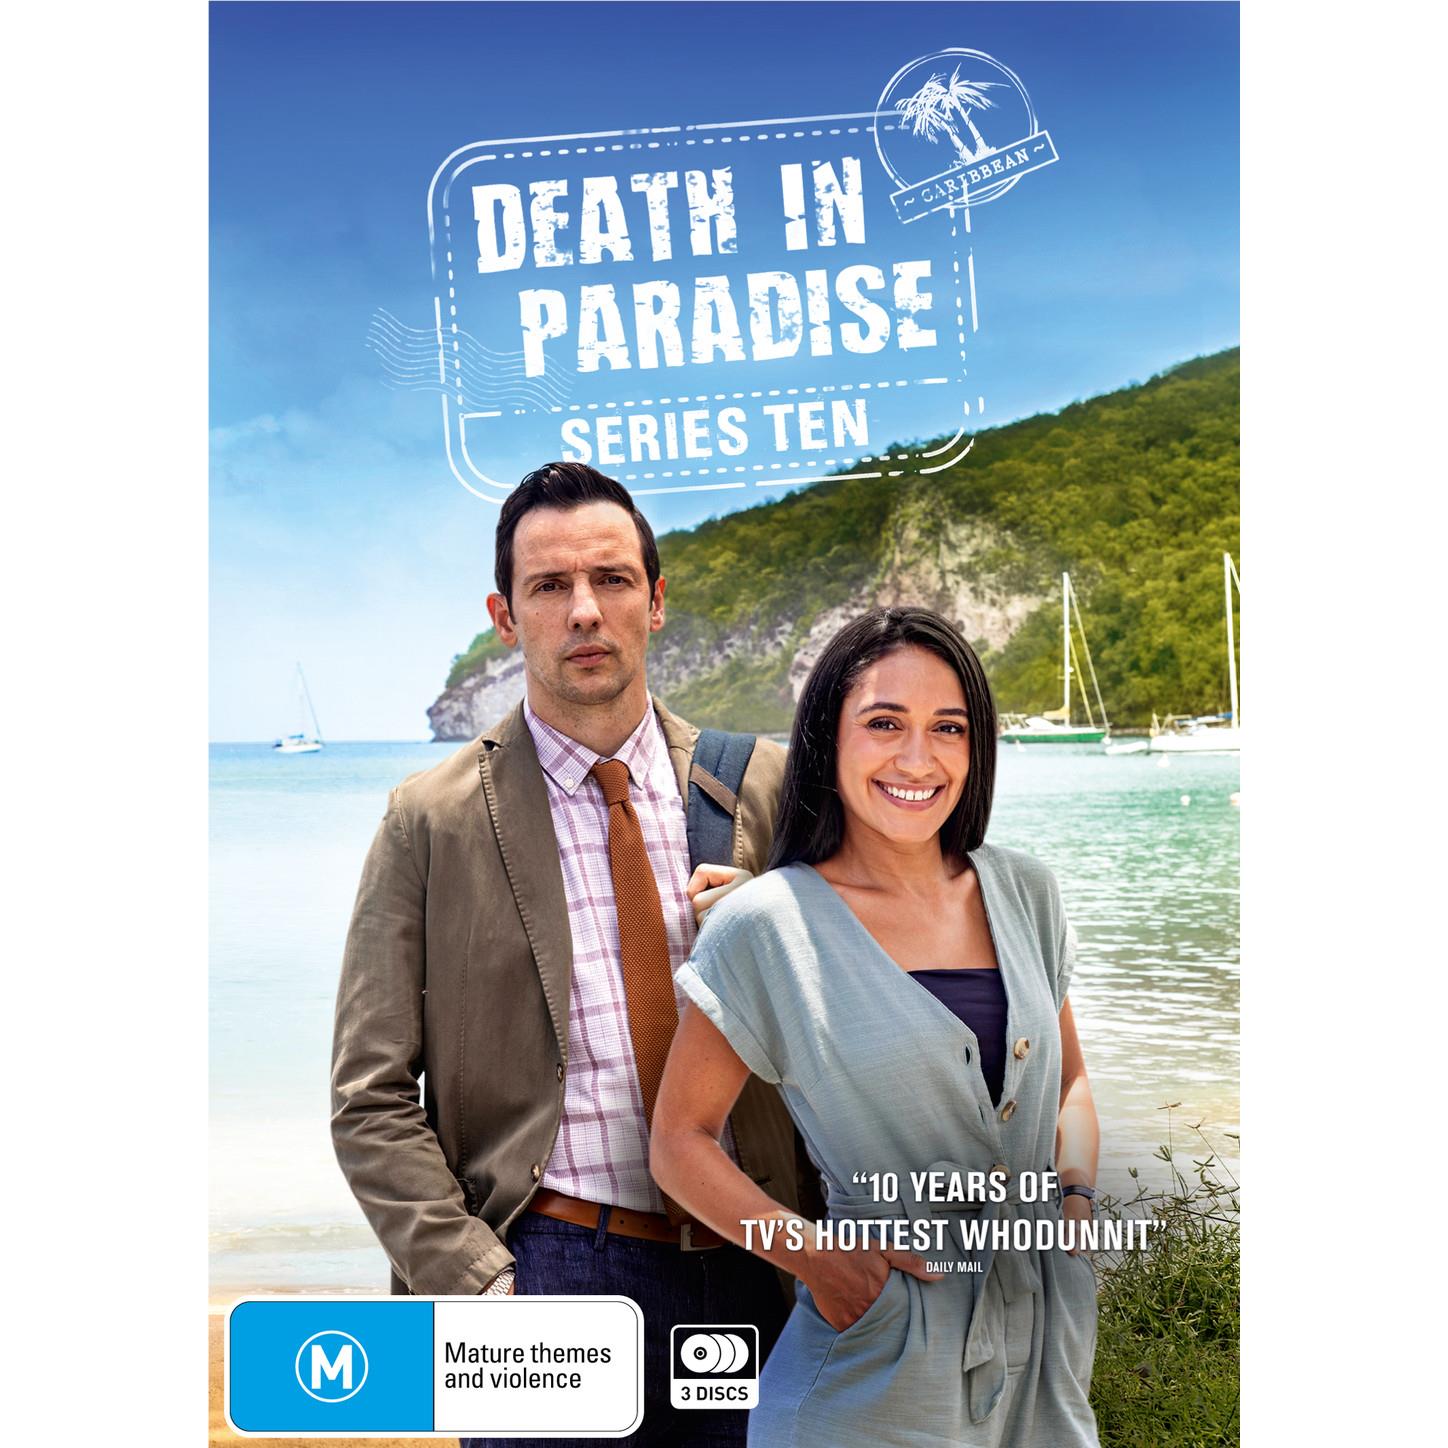 death in paradise - series 10